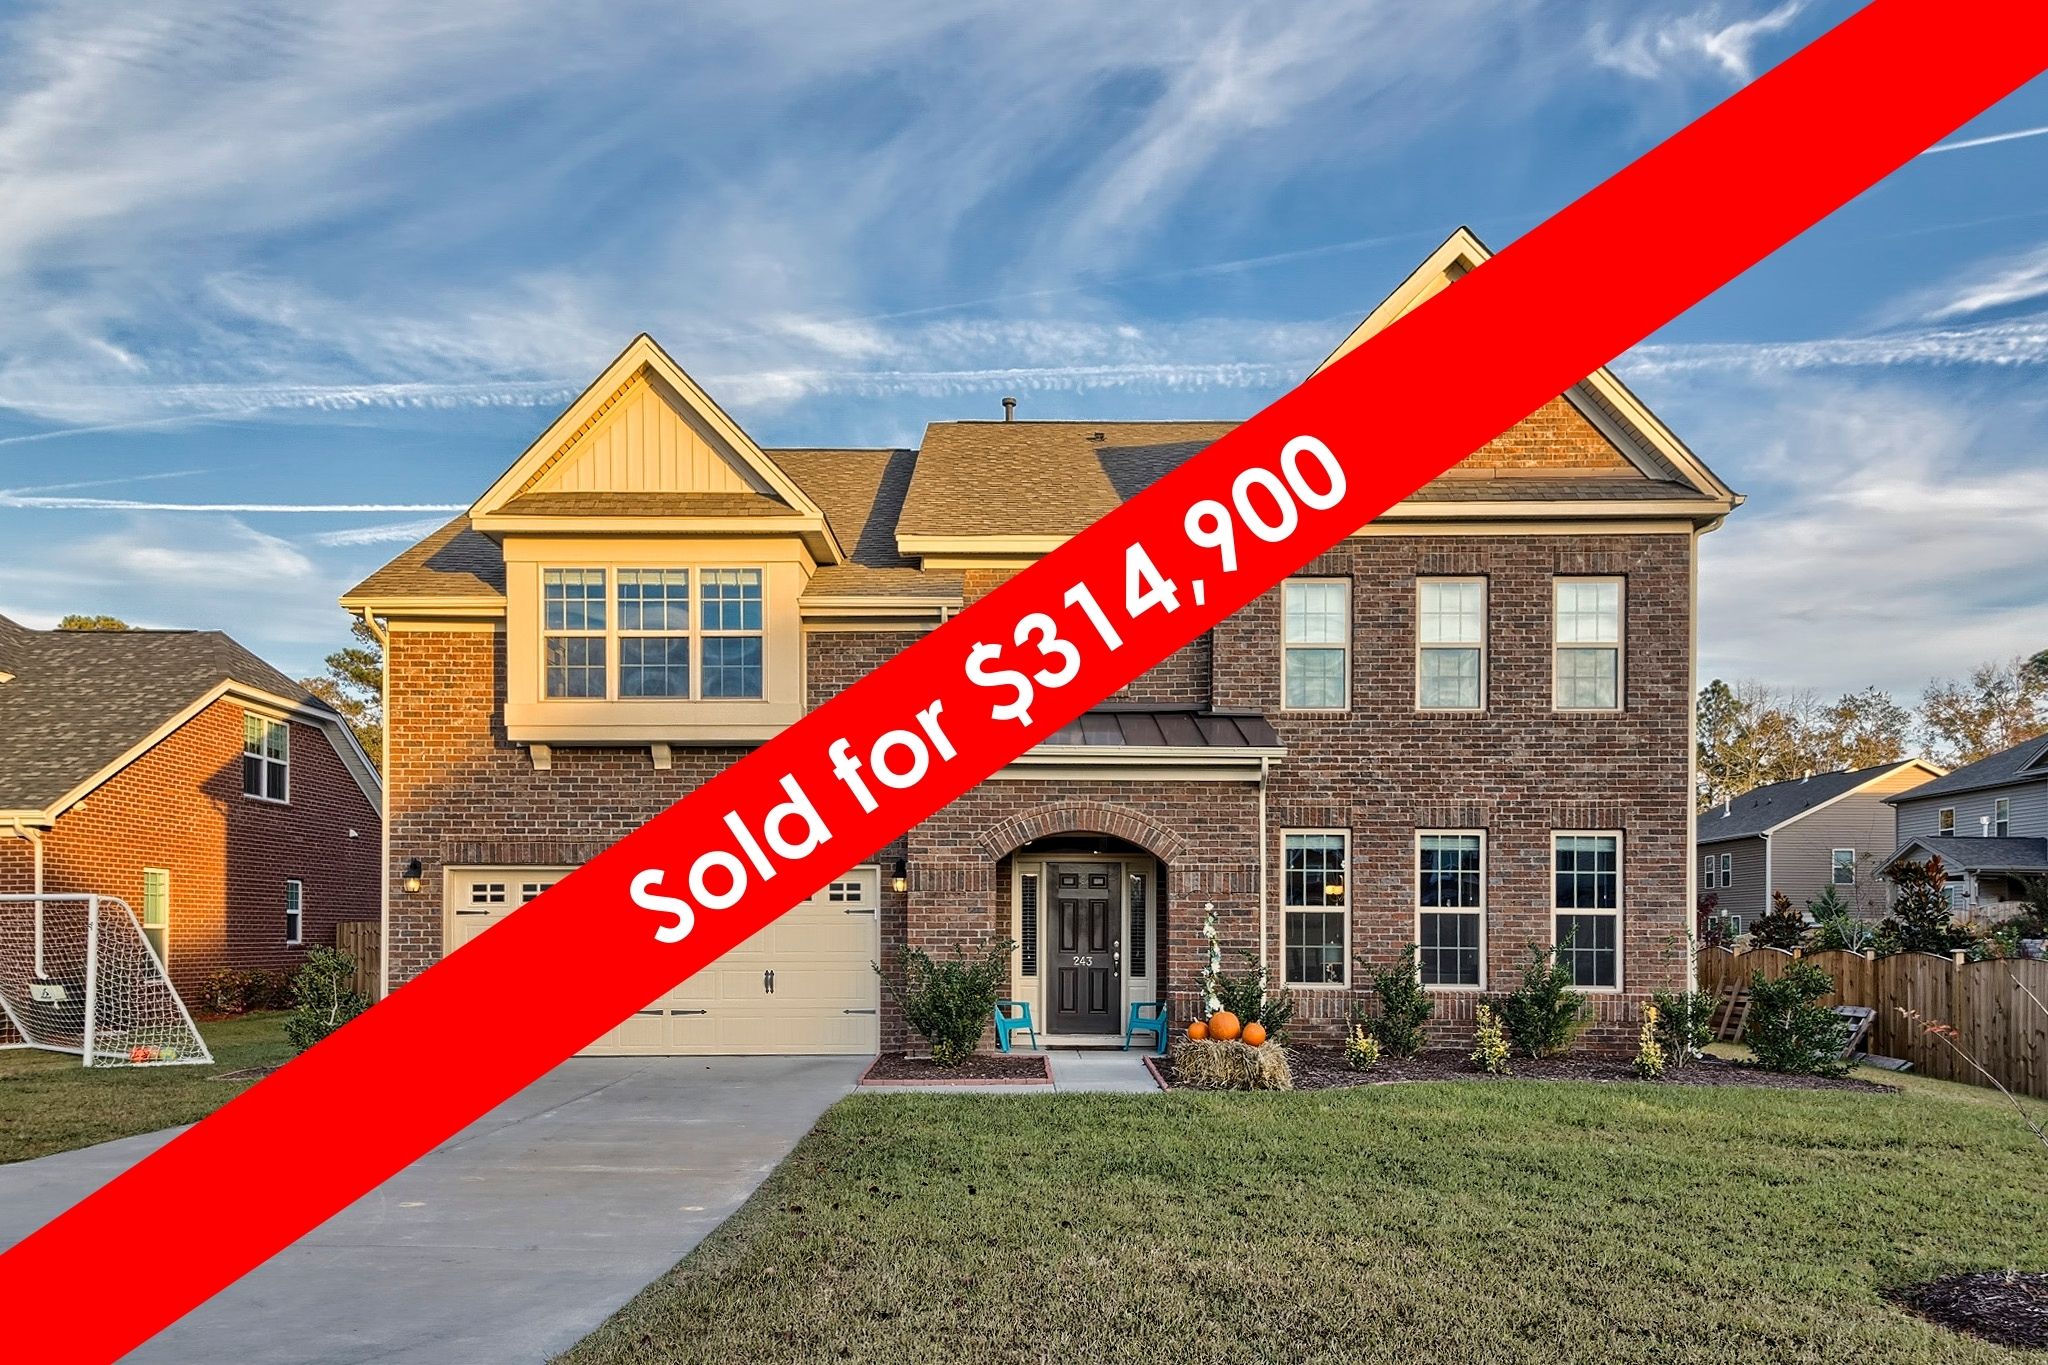 243 Penfolds Court in Lexington sold for $314,900!